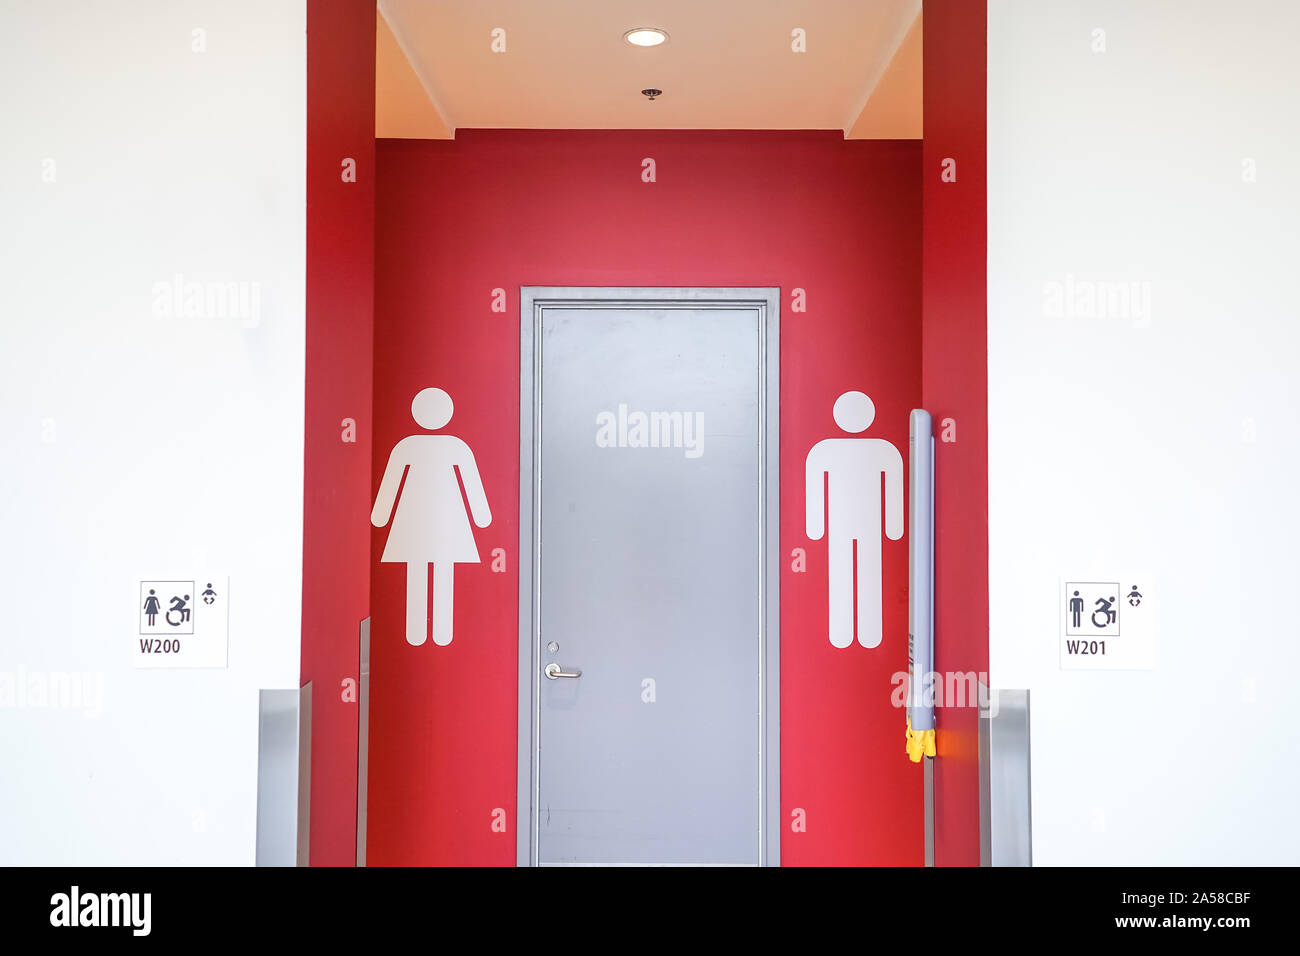 man and woman bathroom sign on bright red wall Stock Photo